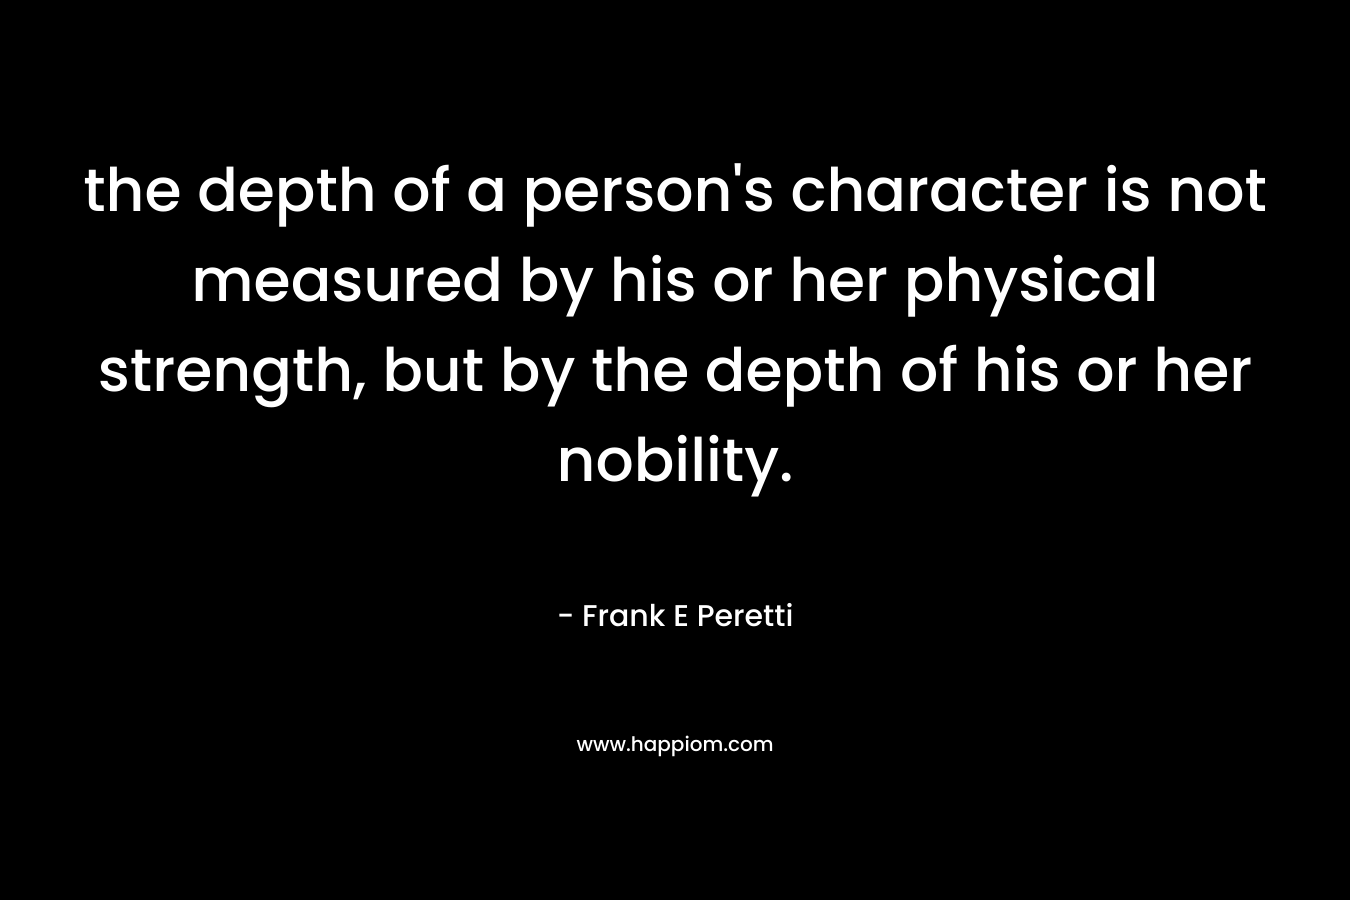 the depth of a person’s character is not measured by his or her physical strength, but by the depth of his or her nobility. – Frank E Peretti